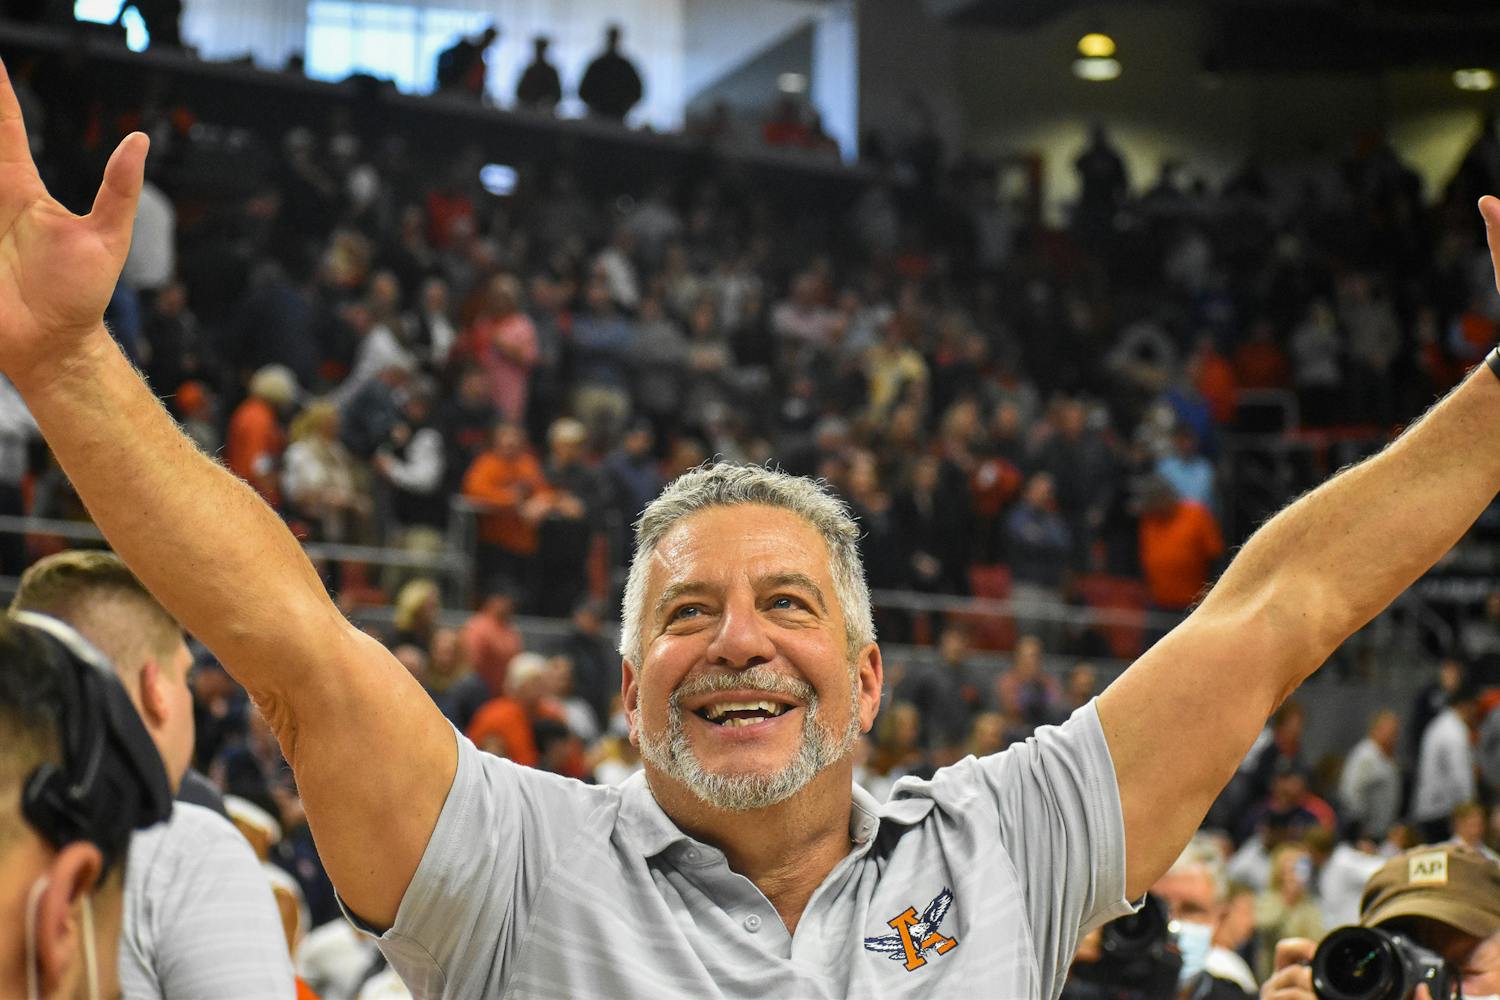 Bruce Pearl Arms stretched high MBB